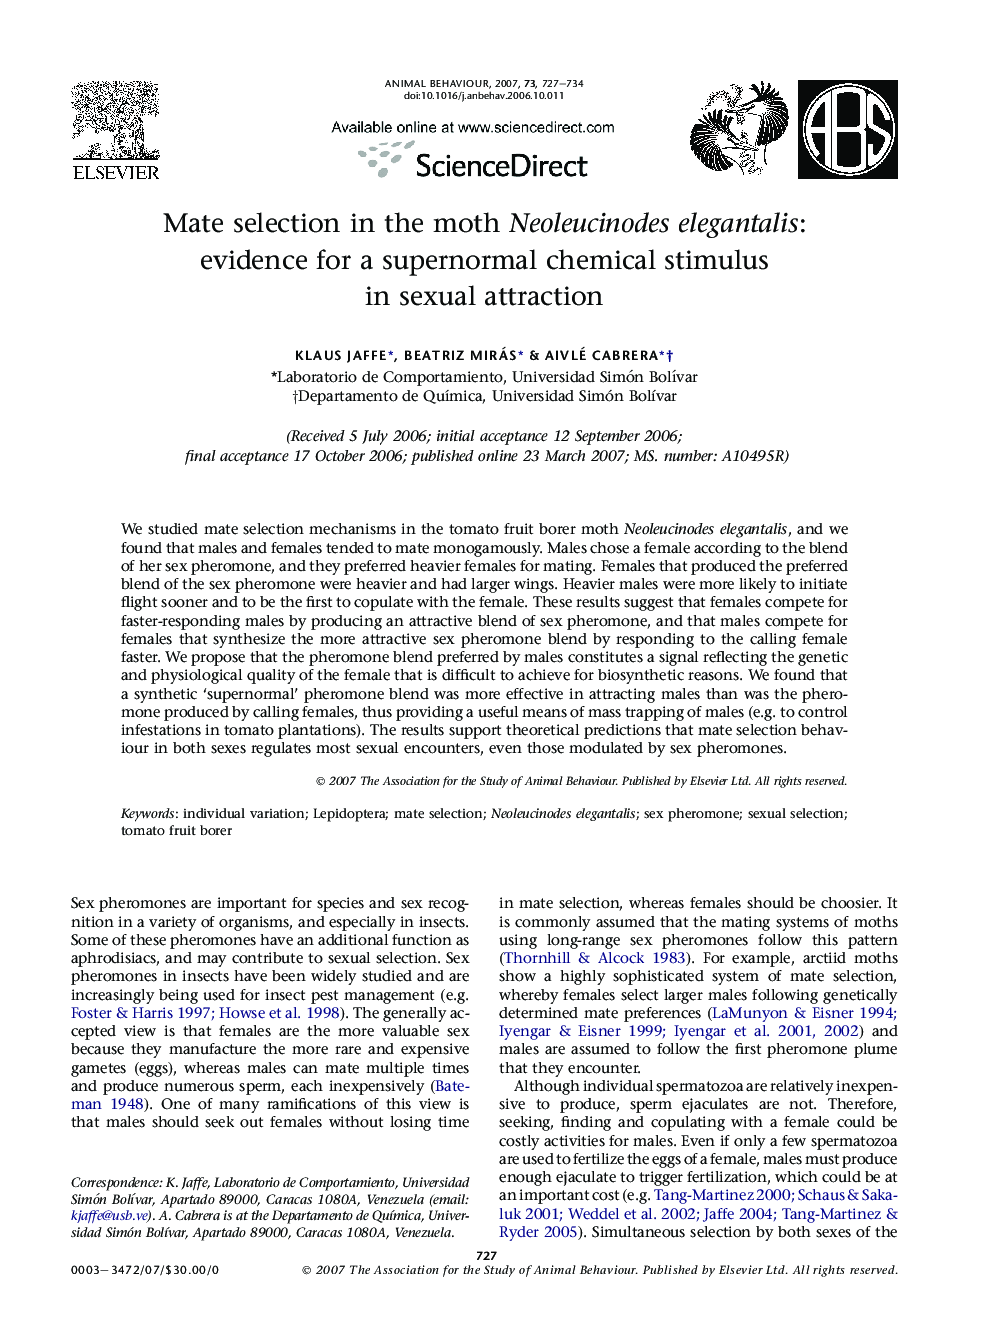 Mate selection in the moth Neoleucinodes elegantalis: evidence for a supernormal chemical stimulus in sexual attraction